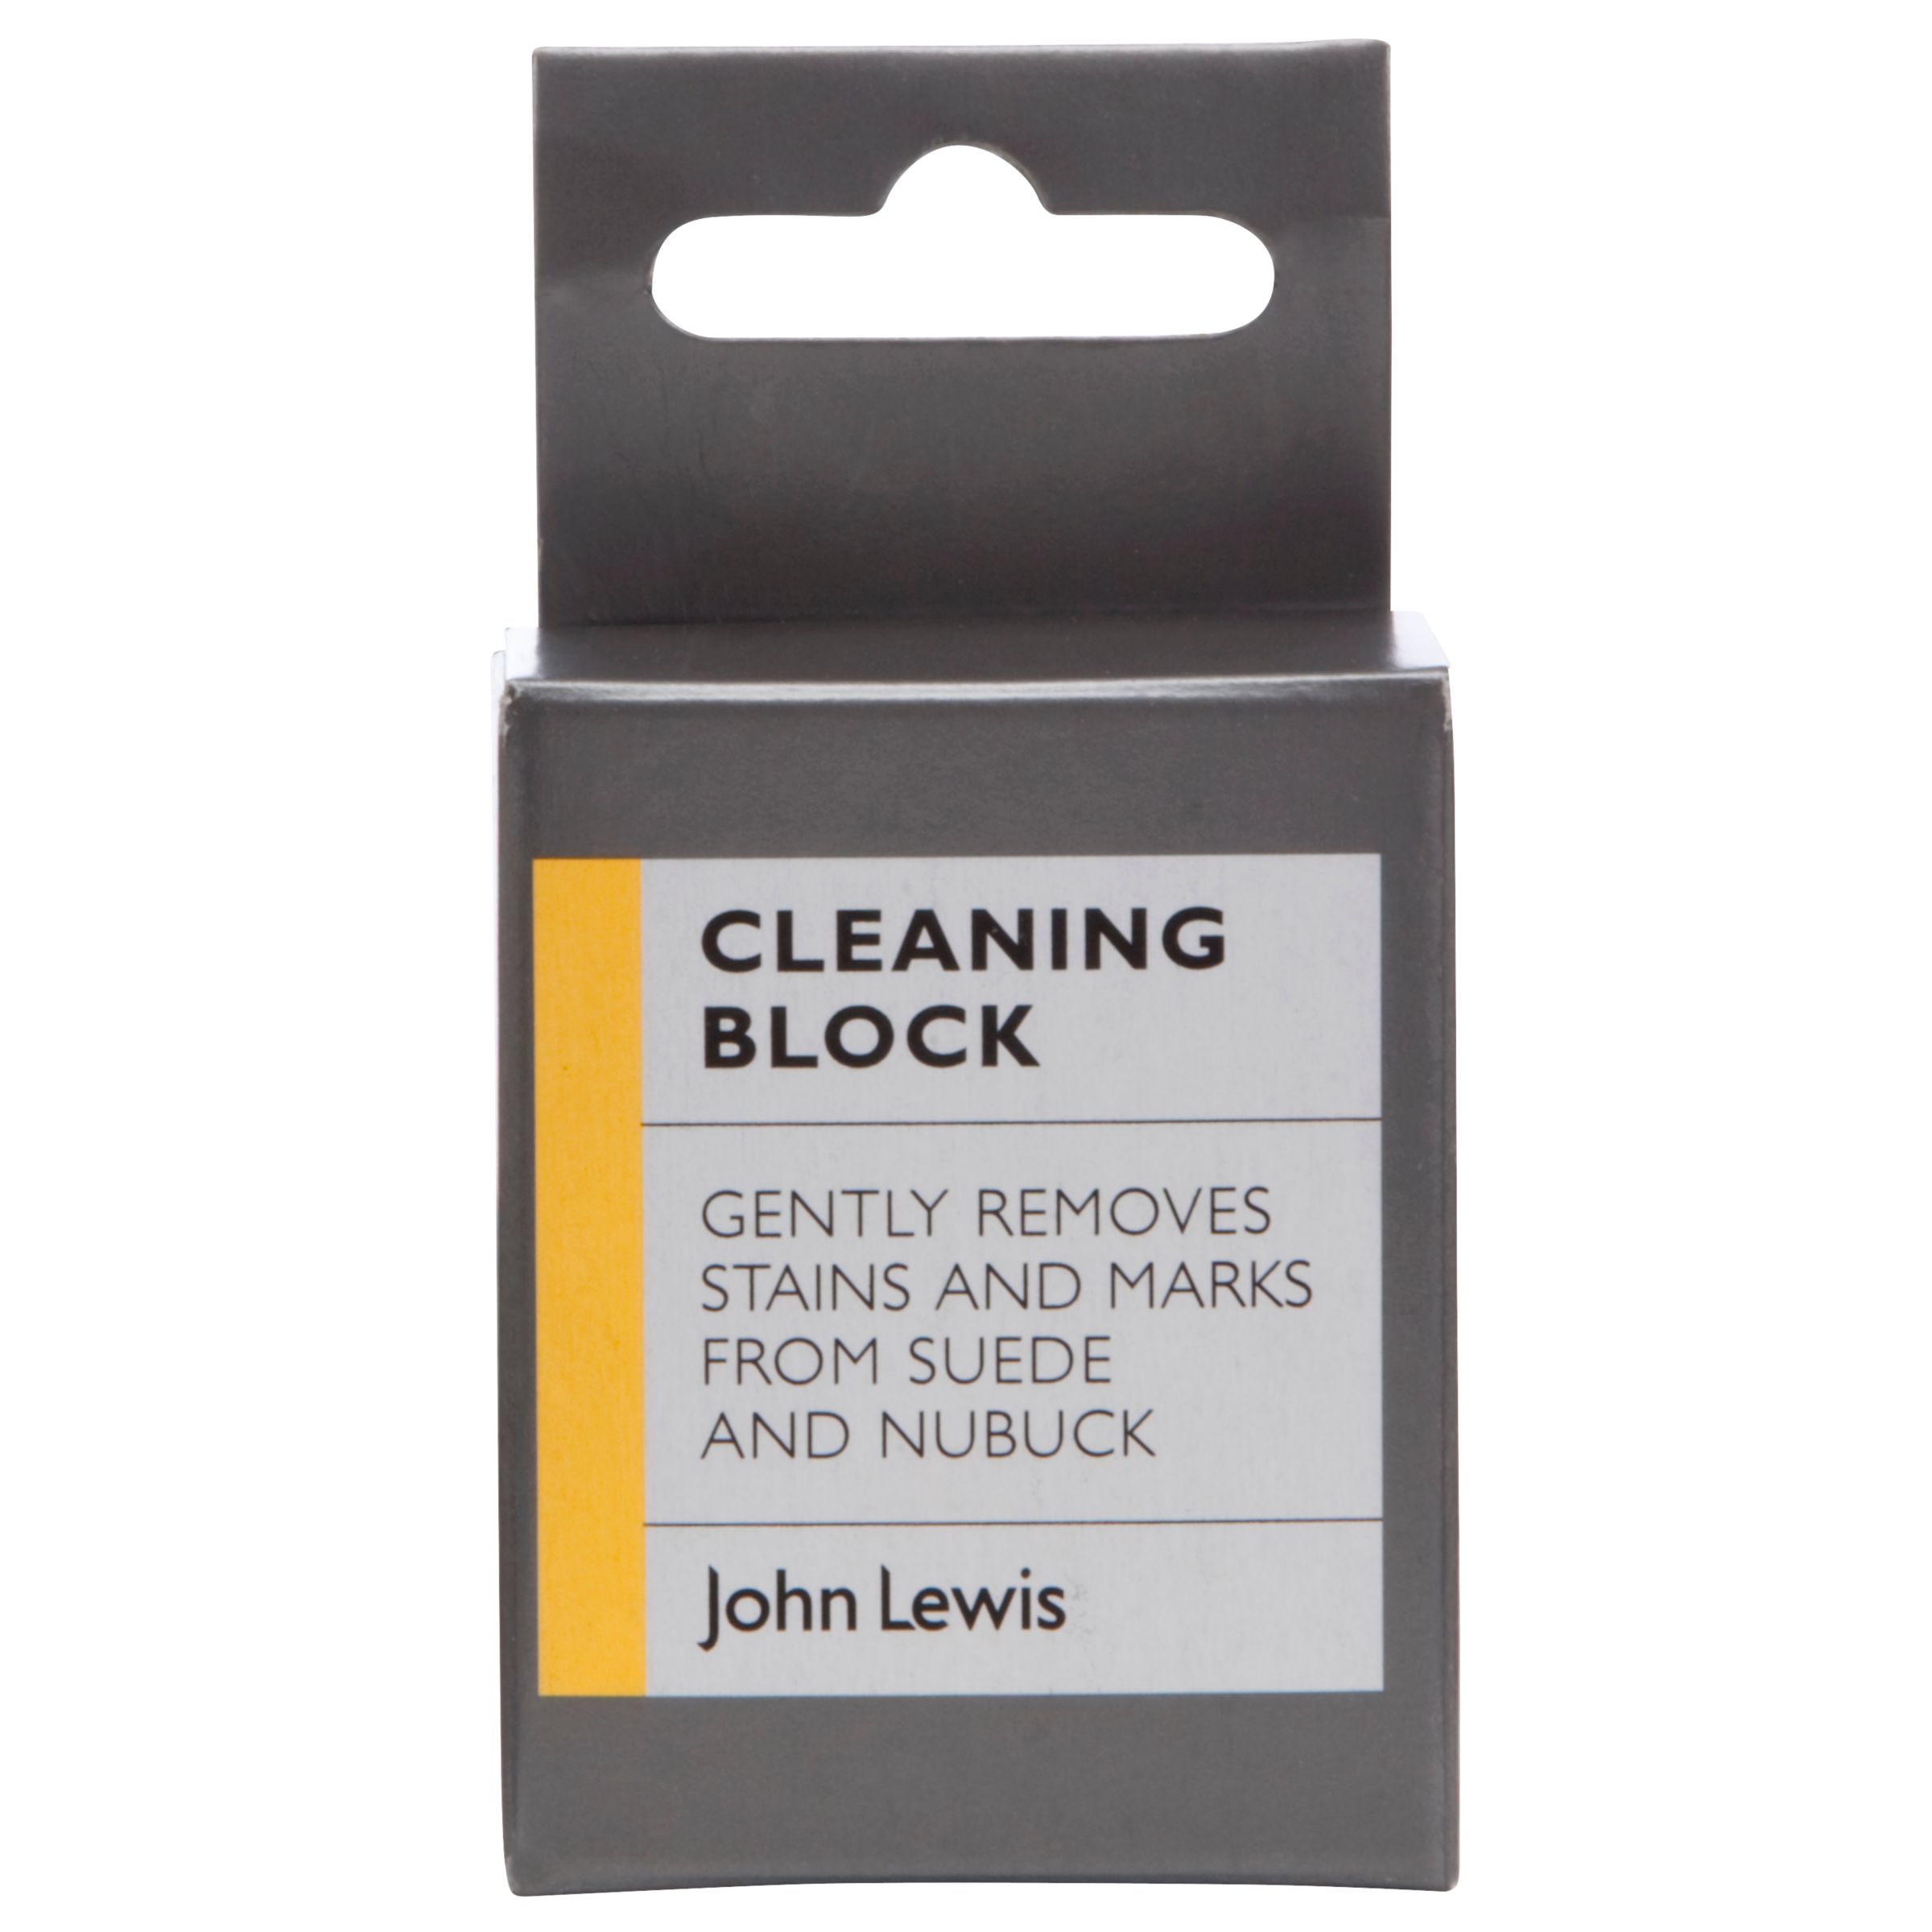 John Lewis Suede and Nubuck Cleaning Block